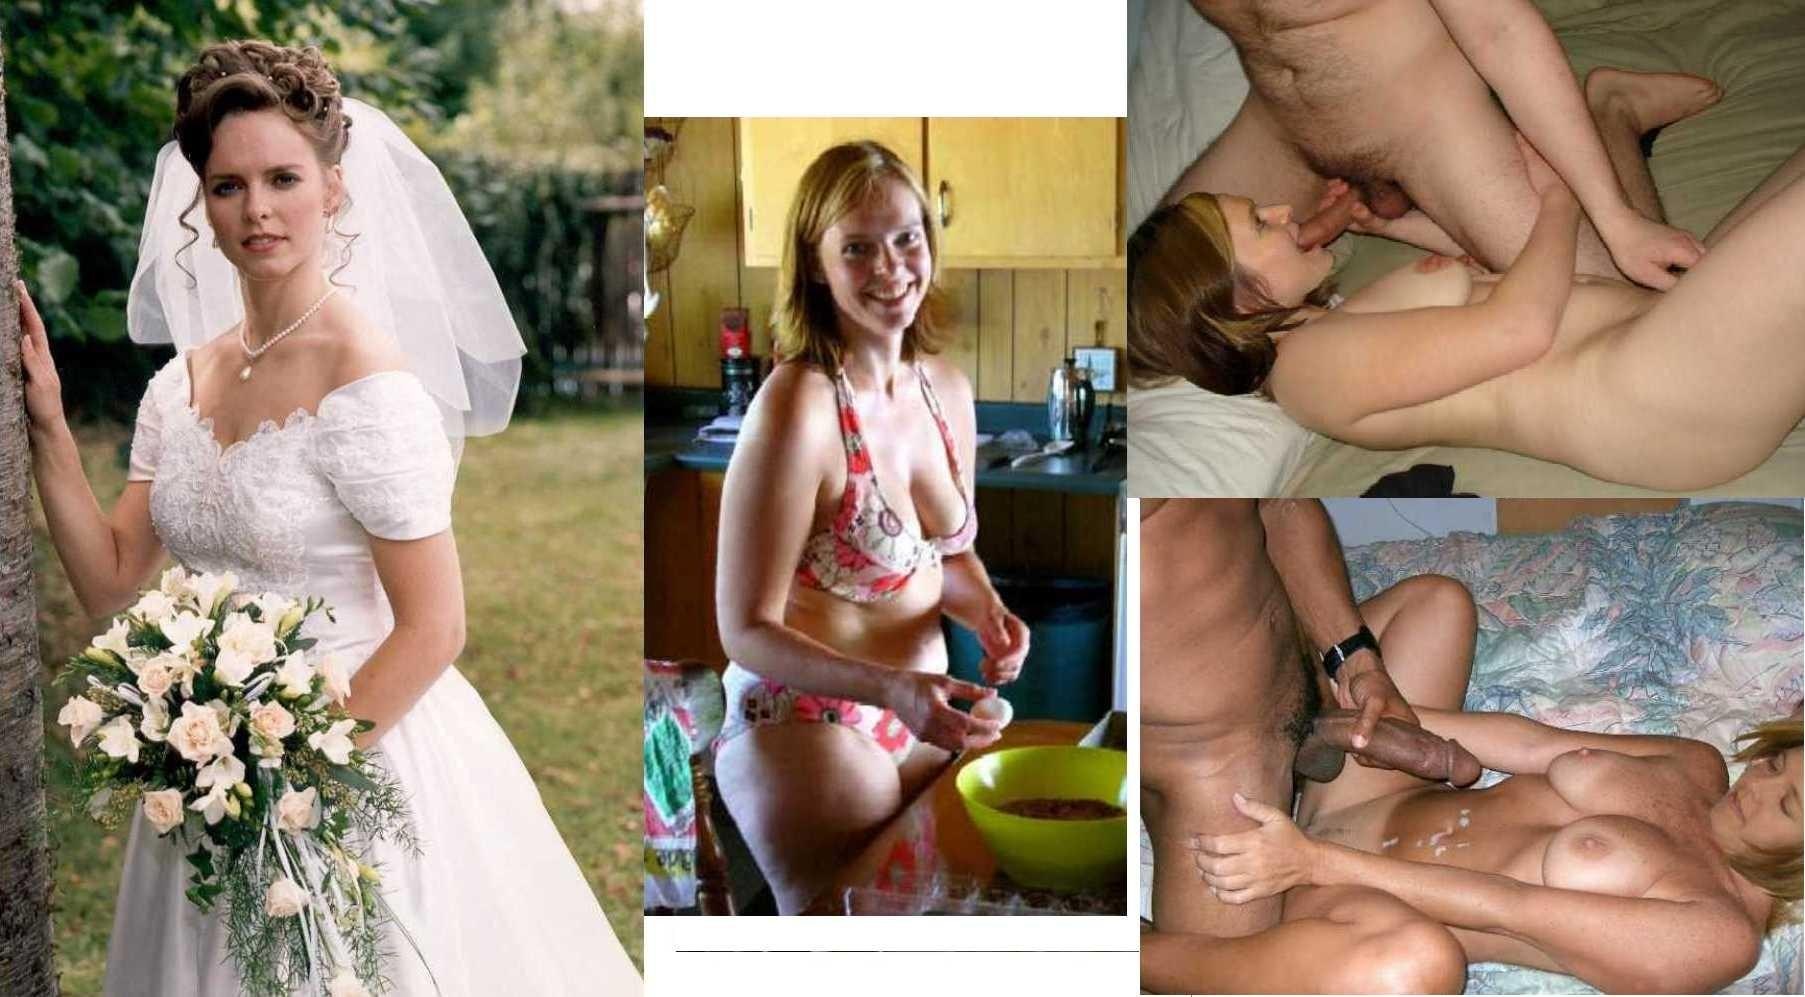 Real Sex with the Bride at the Wedding (55 photos) - porn photo